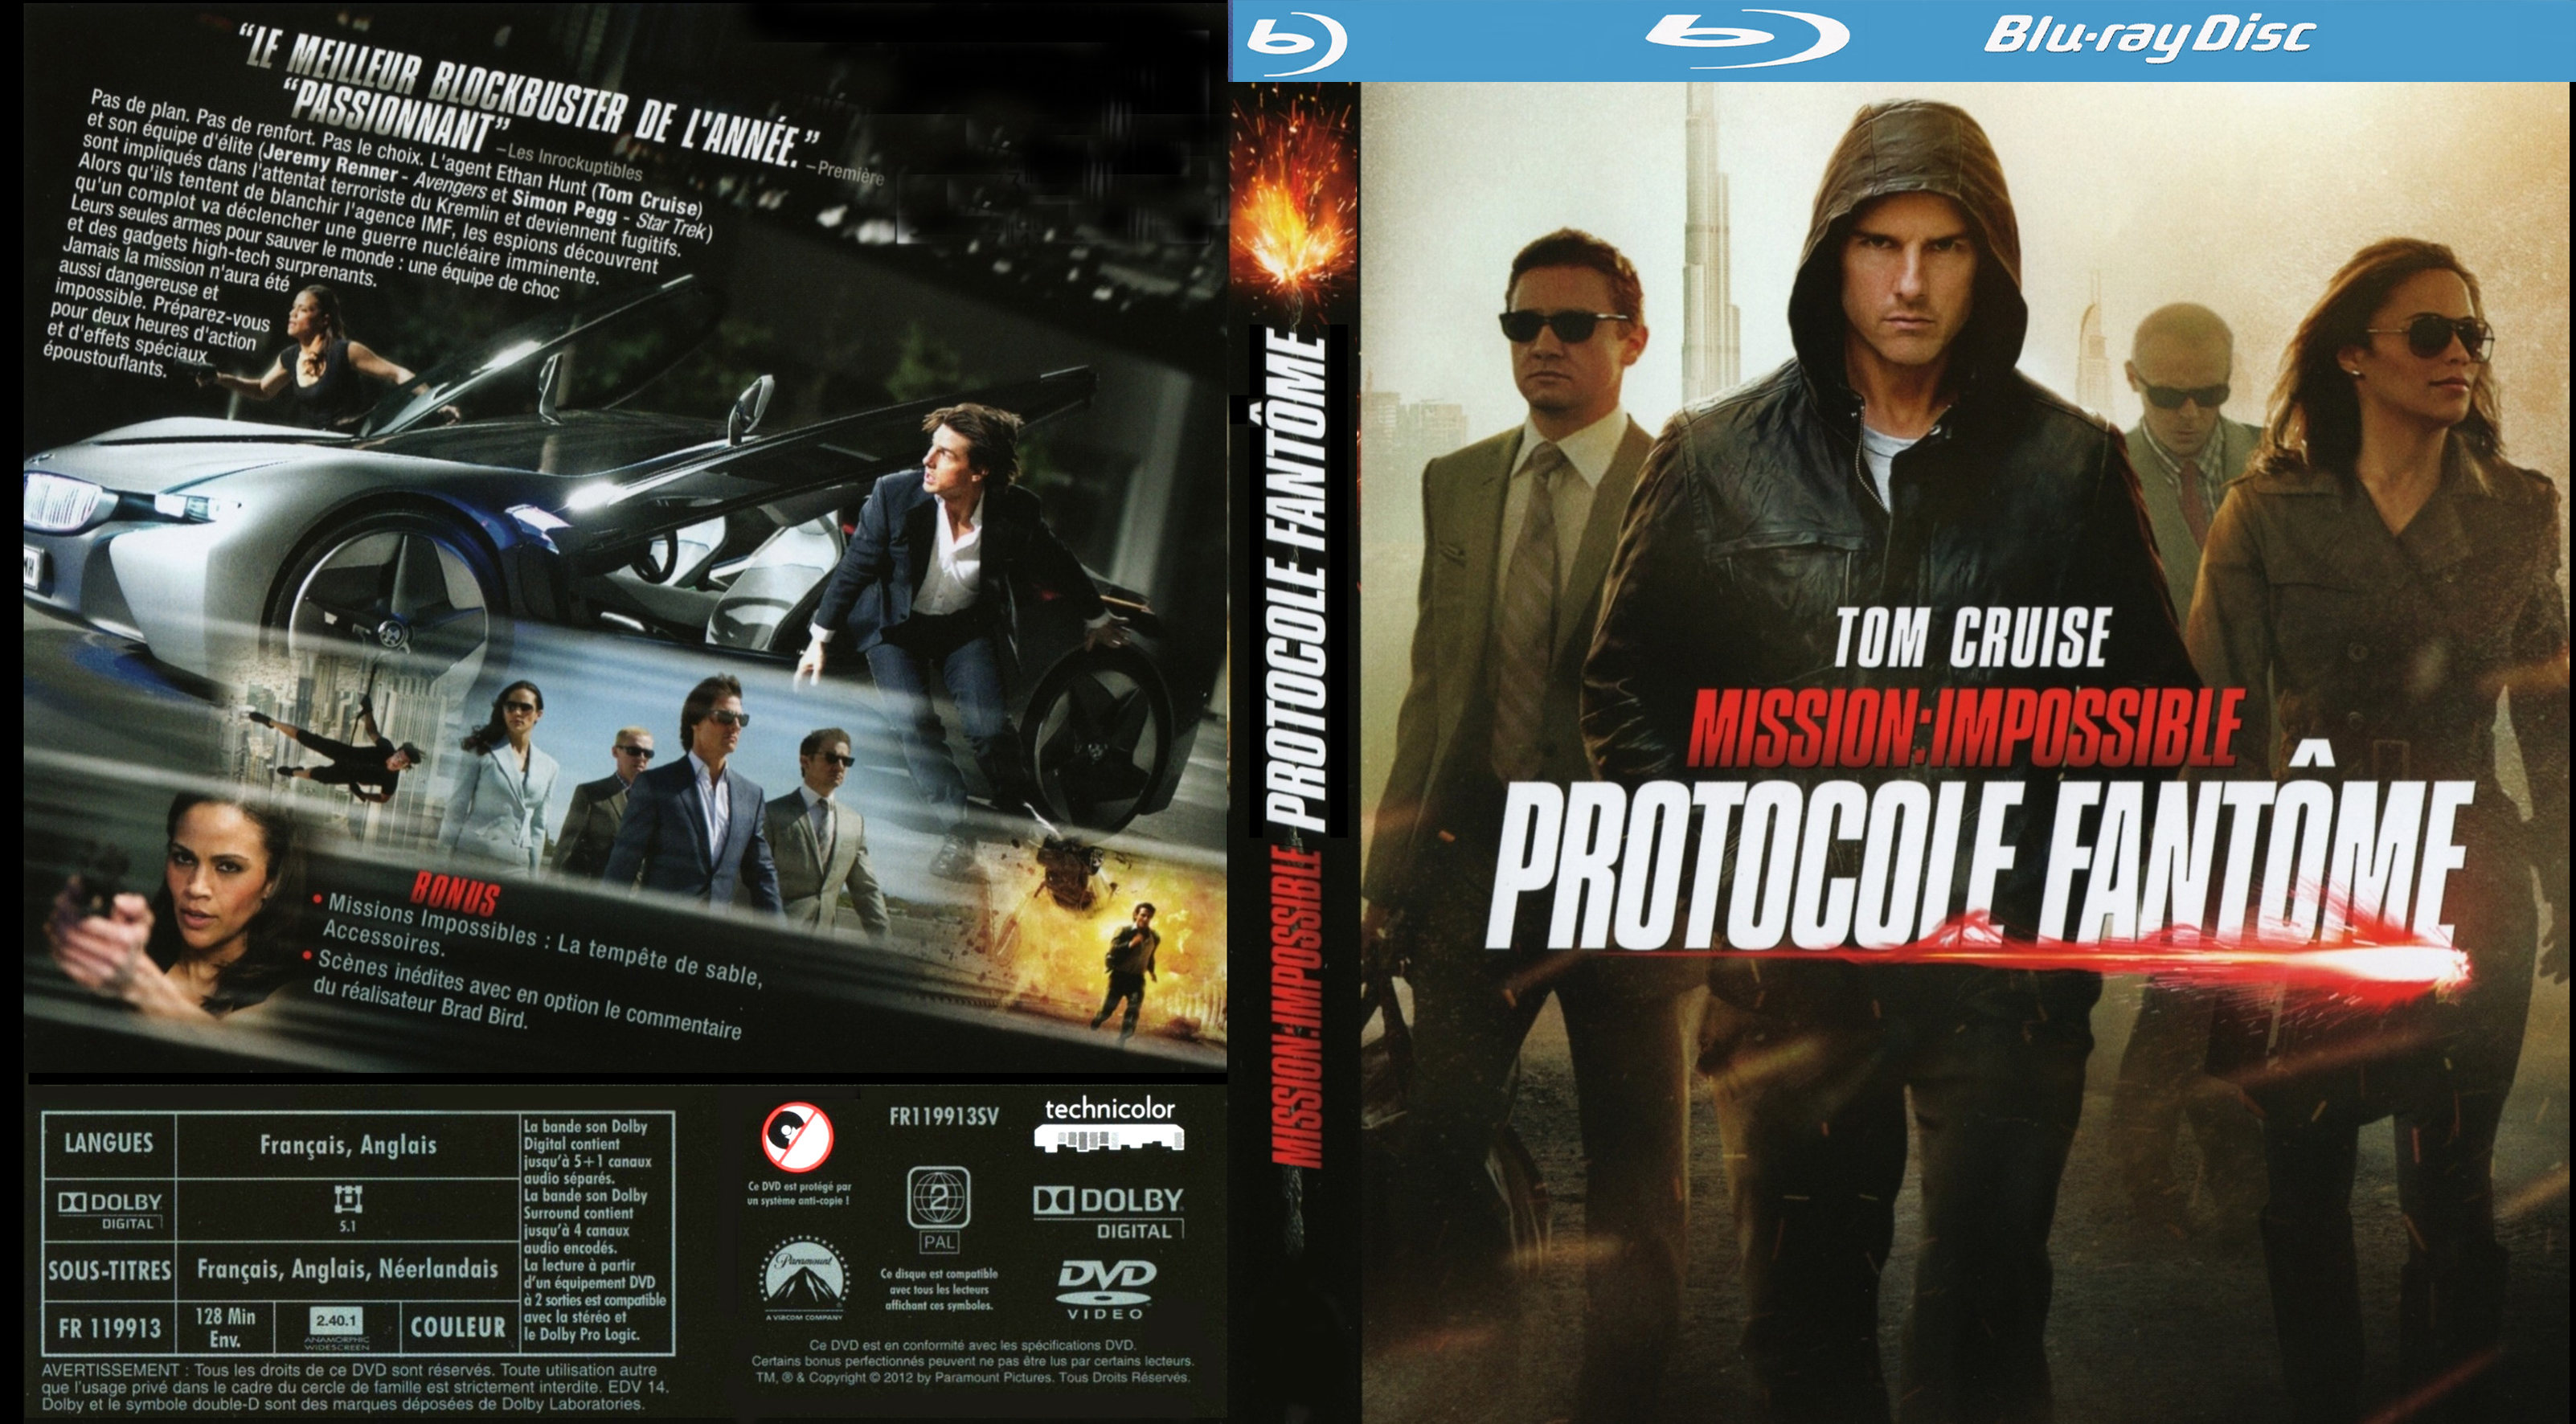 Jaquette DVD Mission Impossible Protocole fantme custom (BLU-RAY)